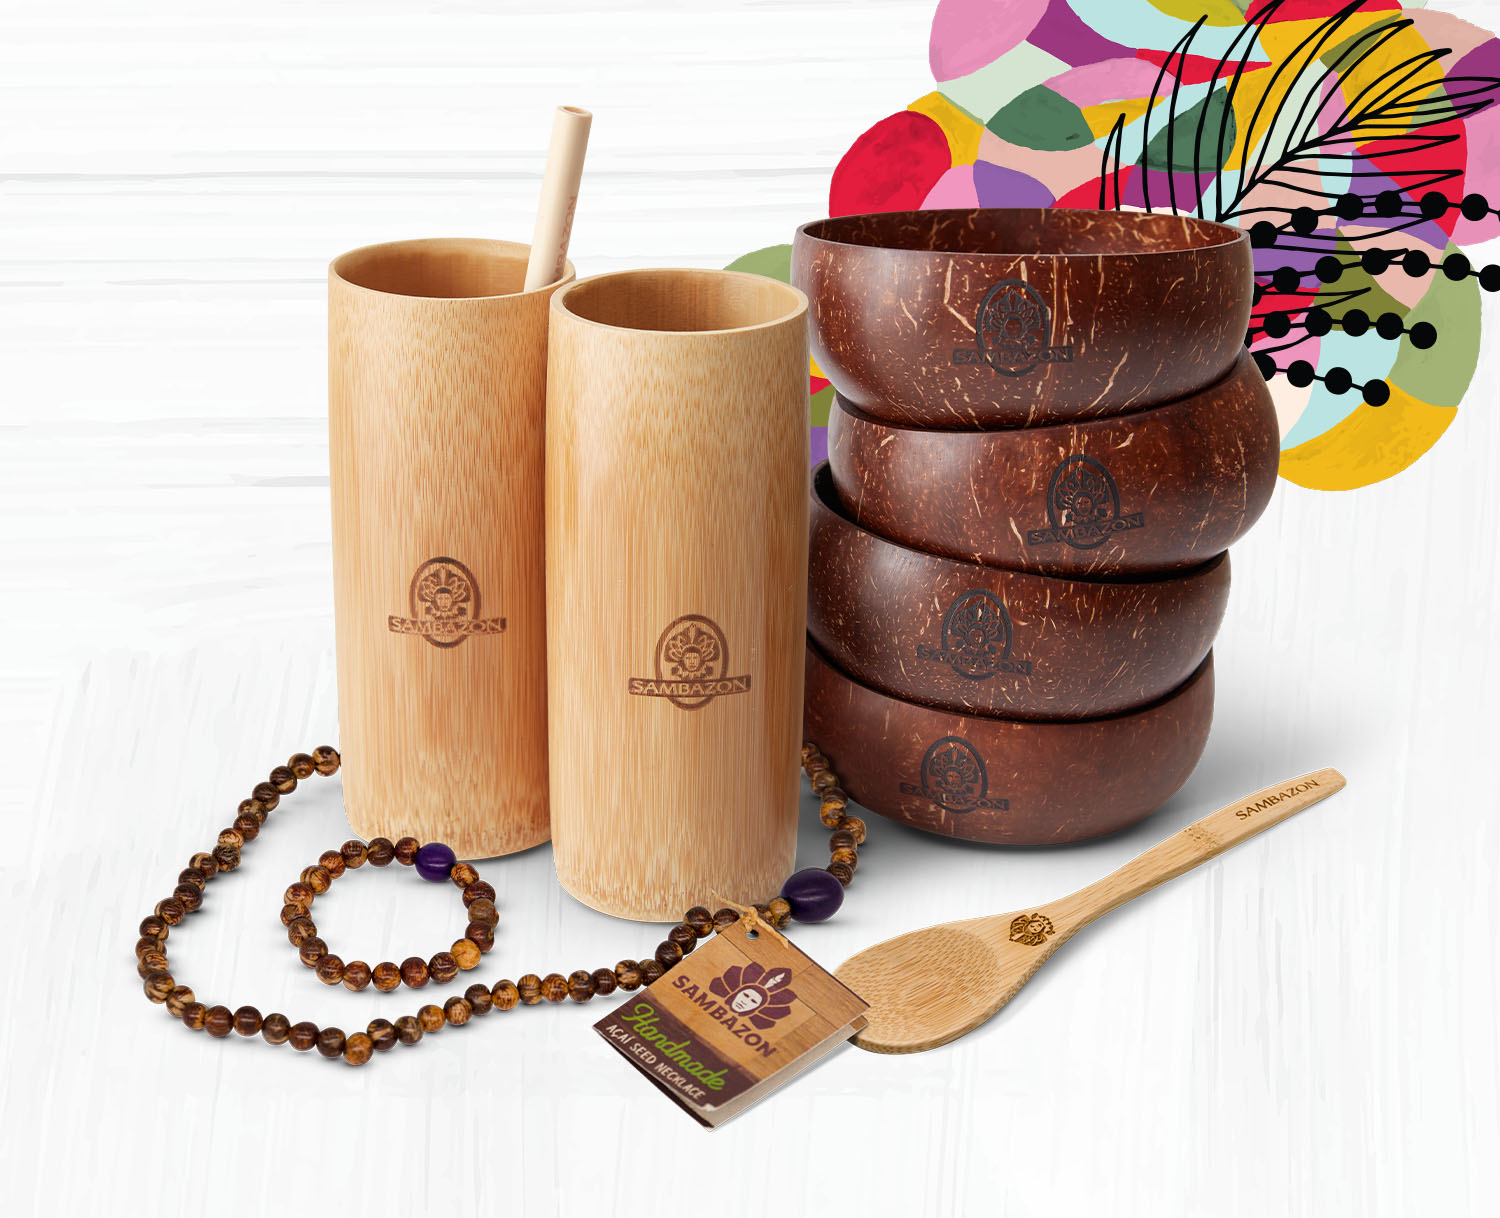 Shop SAMBAZON eco-friendly and sustainable Açaí Accessories. Shop coconut bowls, bamboo cups, bamboo straps, wooden spoons and Açaí jewelry at SAMBAZON.